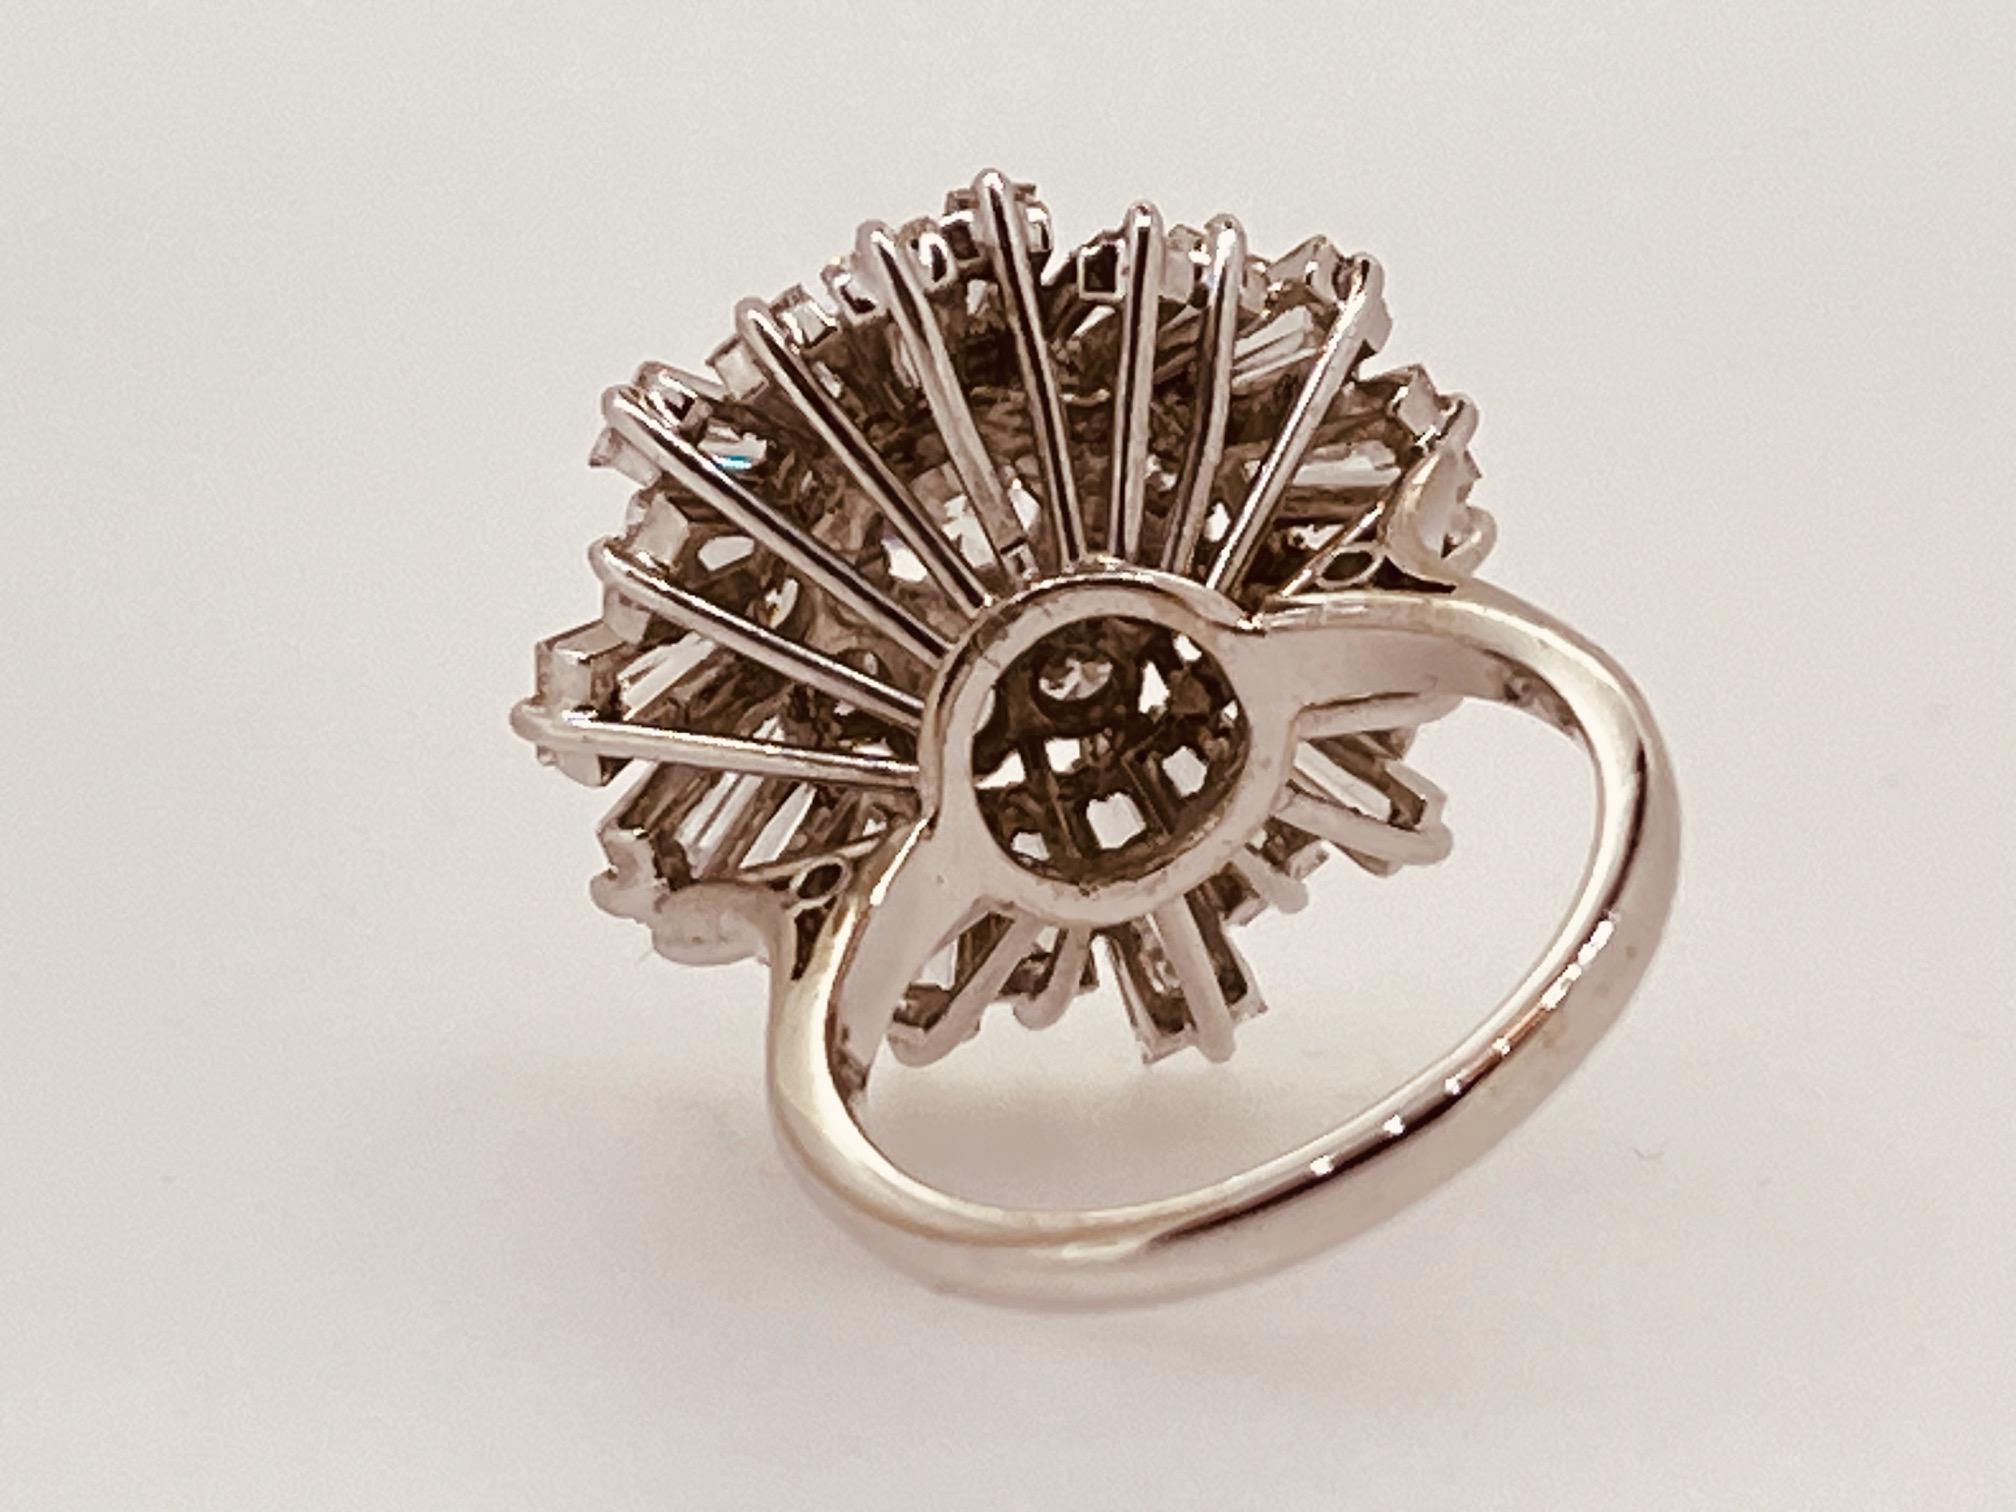 5 Carats Diamond Ballerina Ring Mounted in Platinum, GIA certified, Circa 1960's For Sale 9